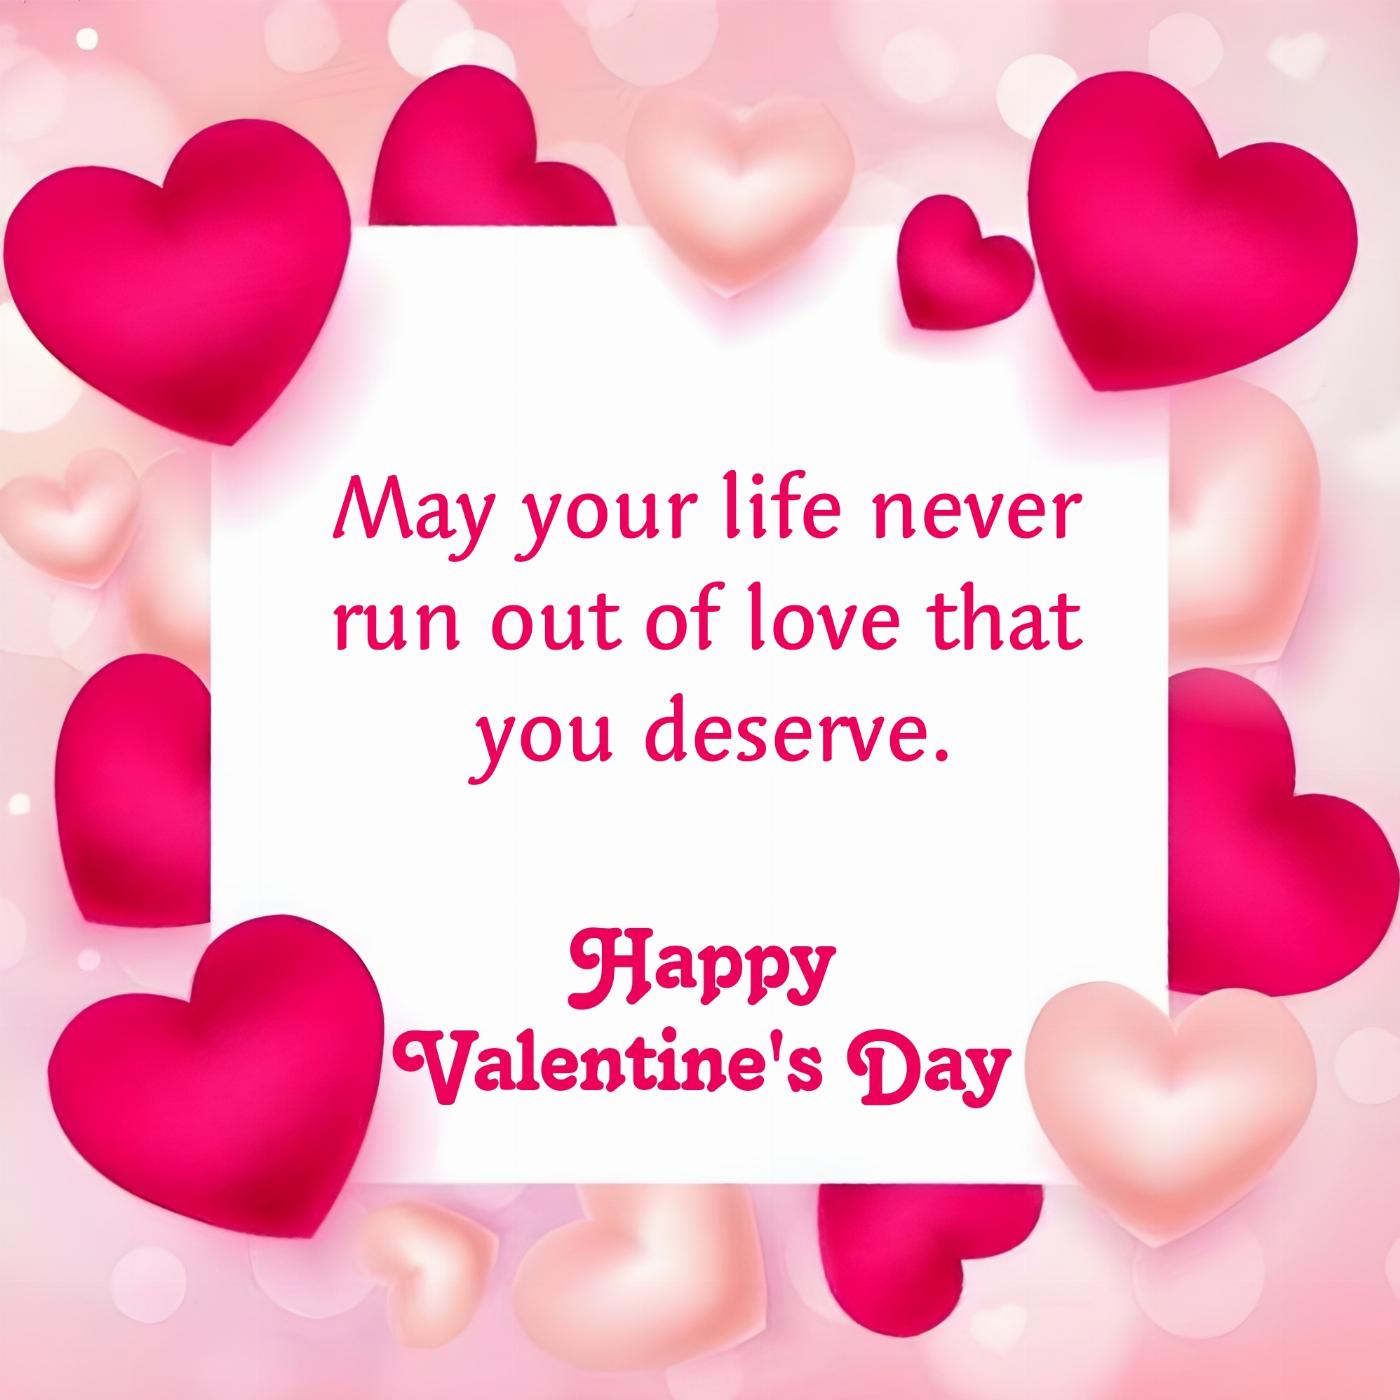 May your life never run out of love that you deserve